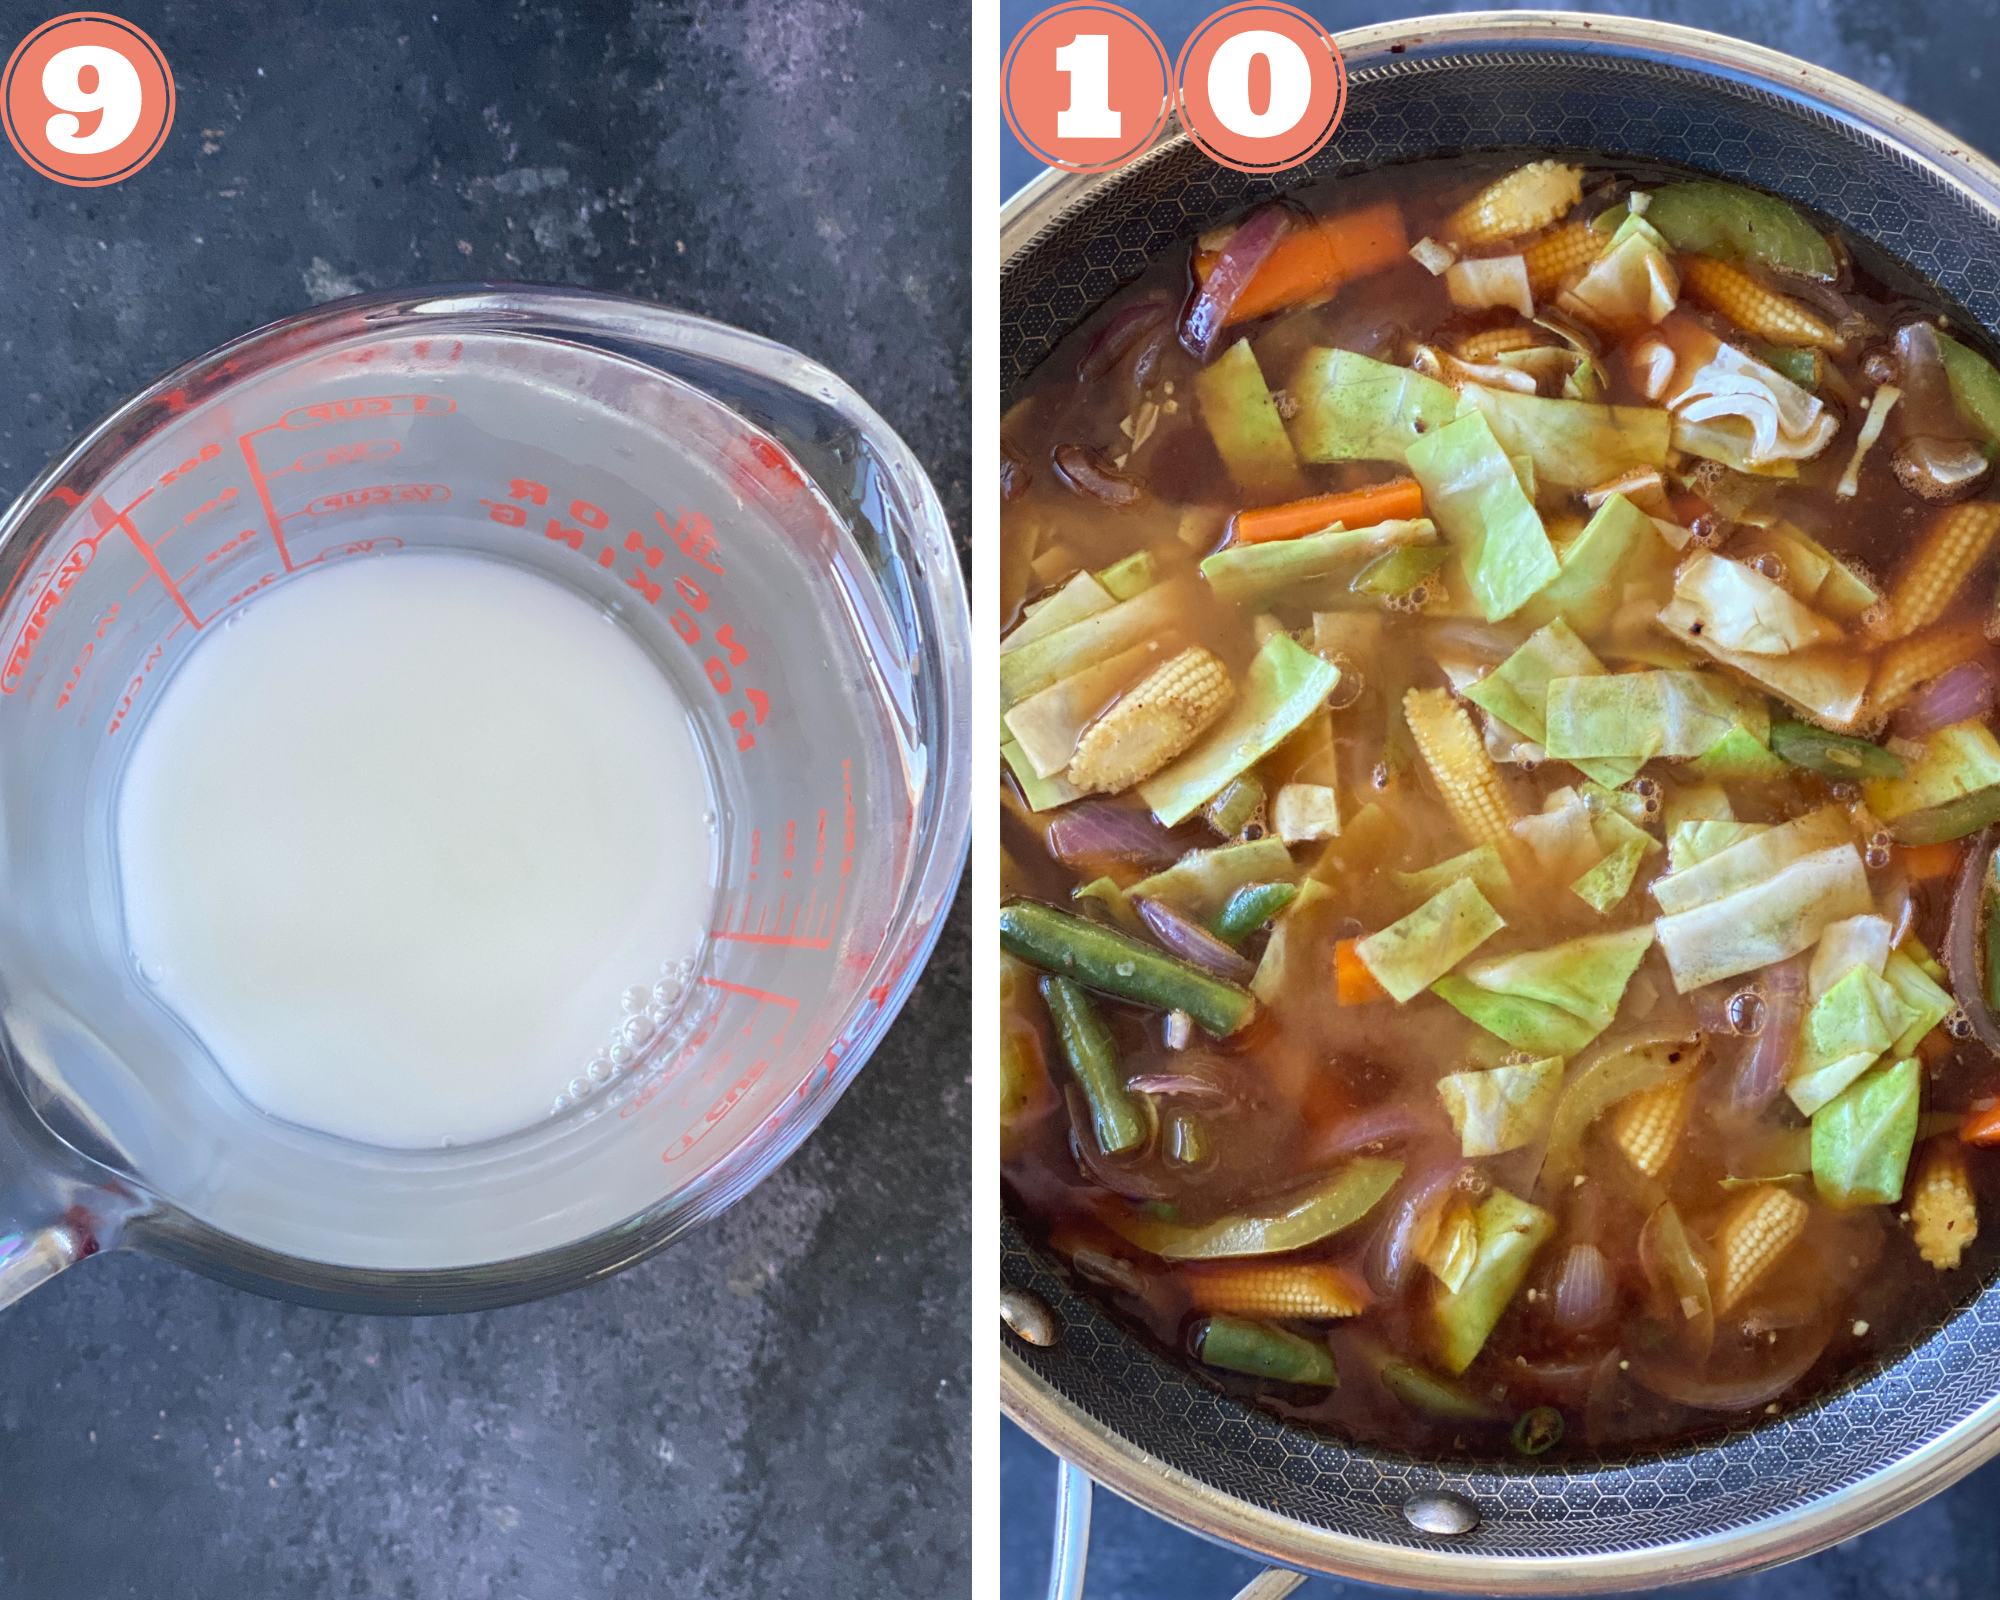 Collage steps to make American Chopsuey; prepare slurry of cornstarch and mix everything well.